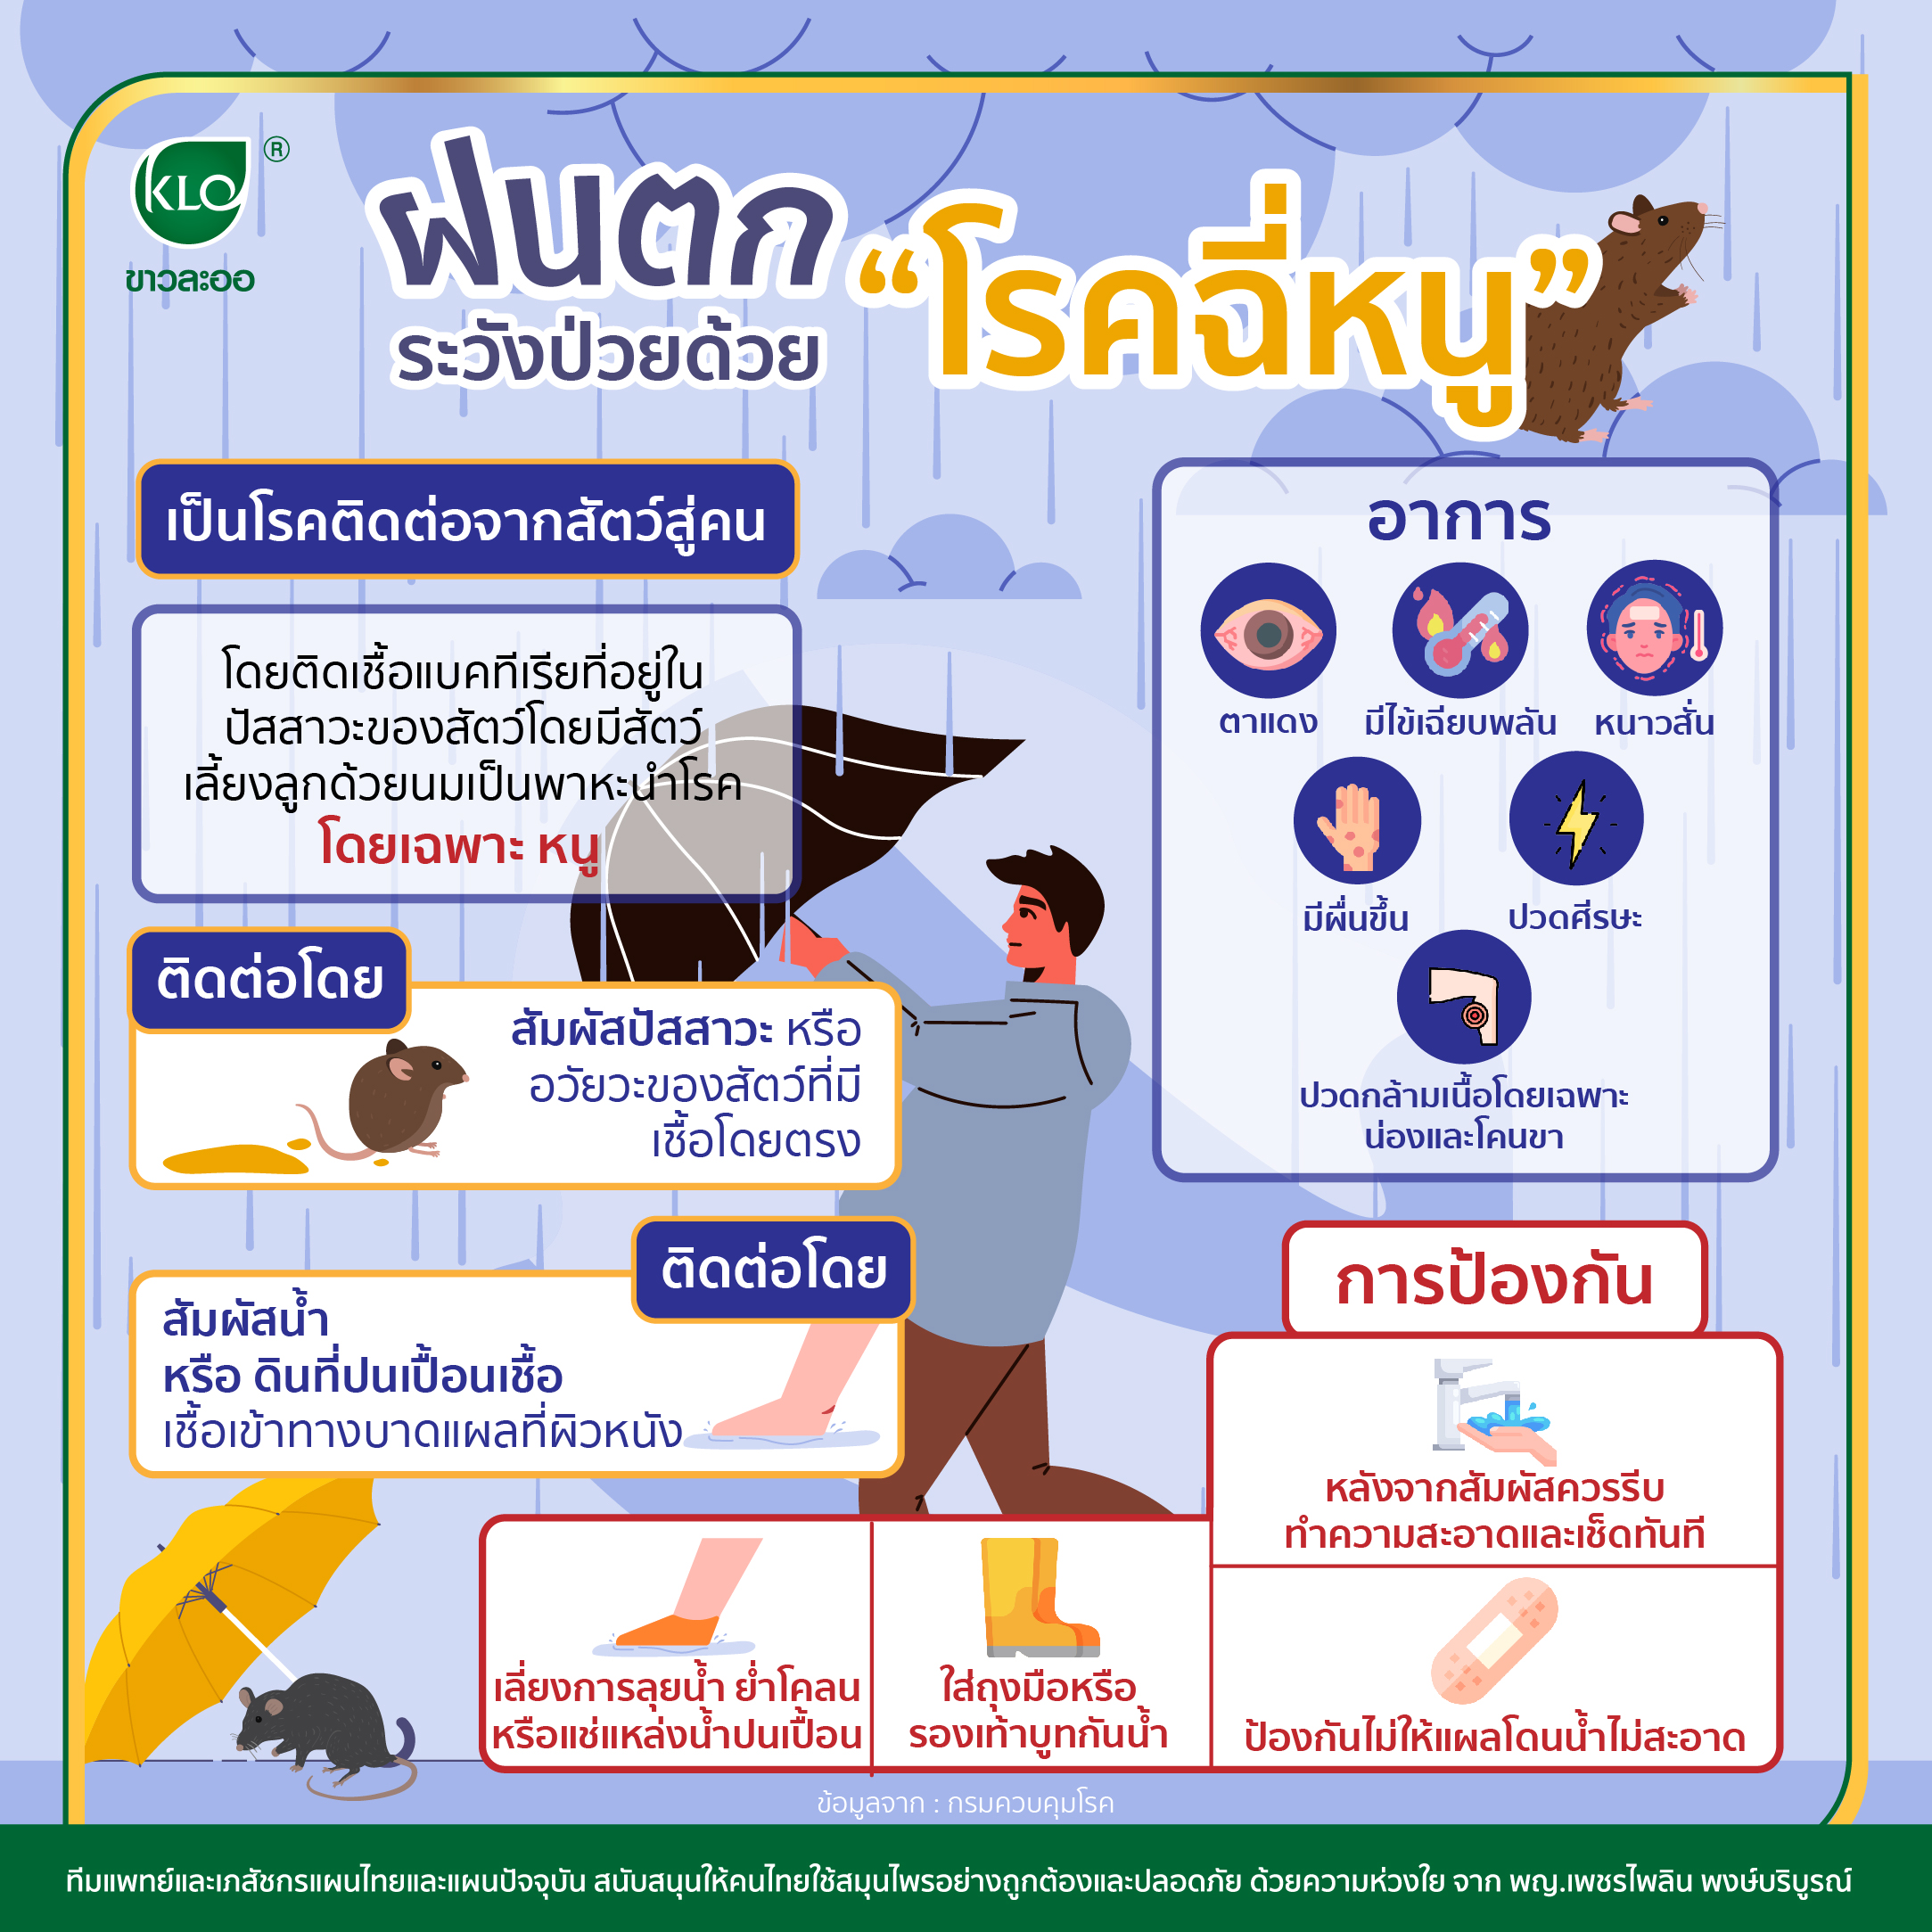 It's raining. Be careful to get sick with "leptospirosis"